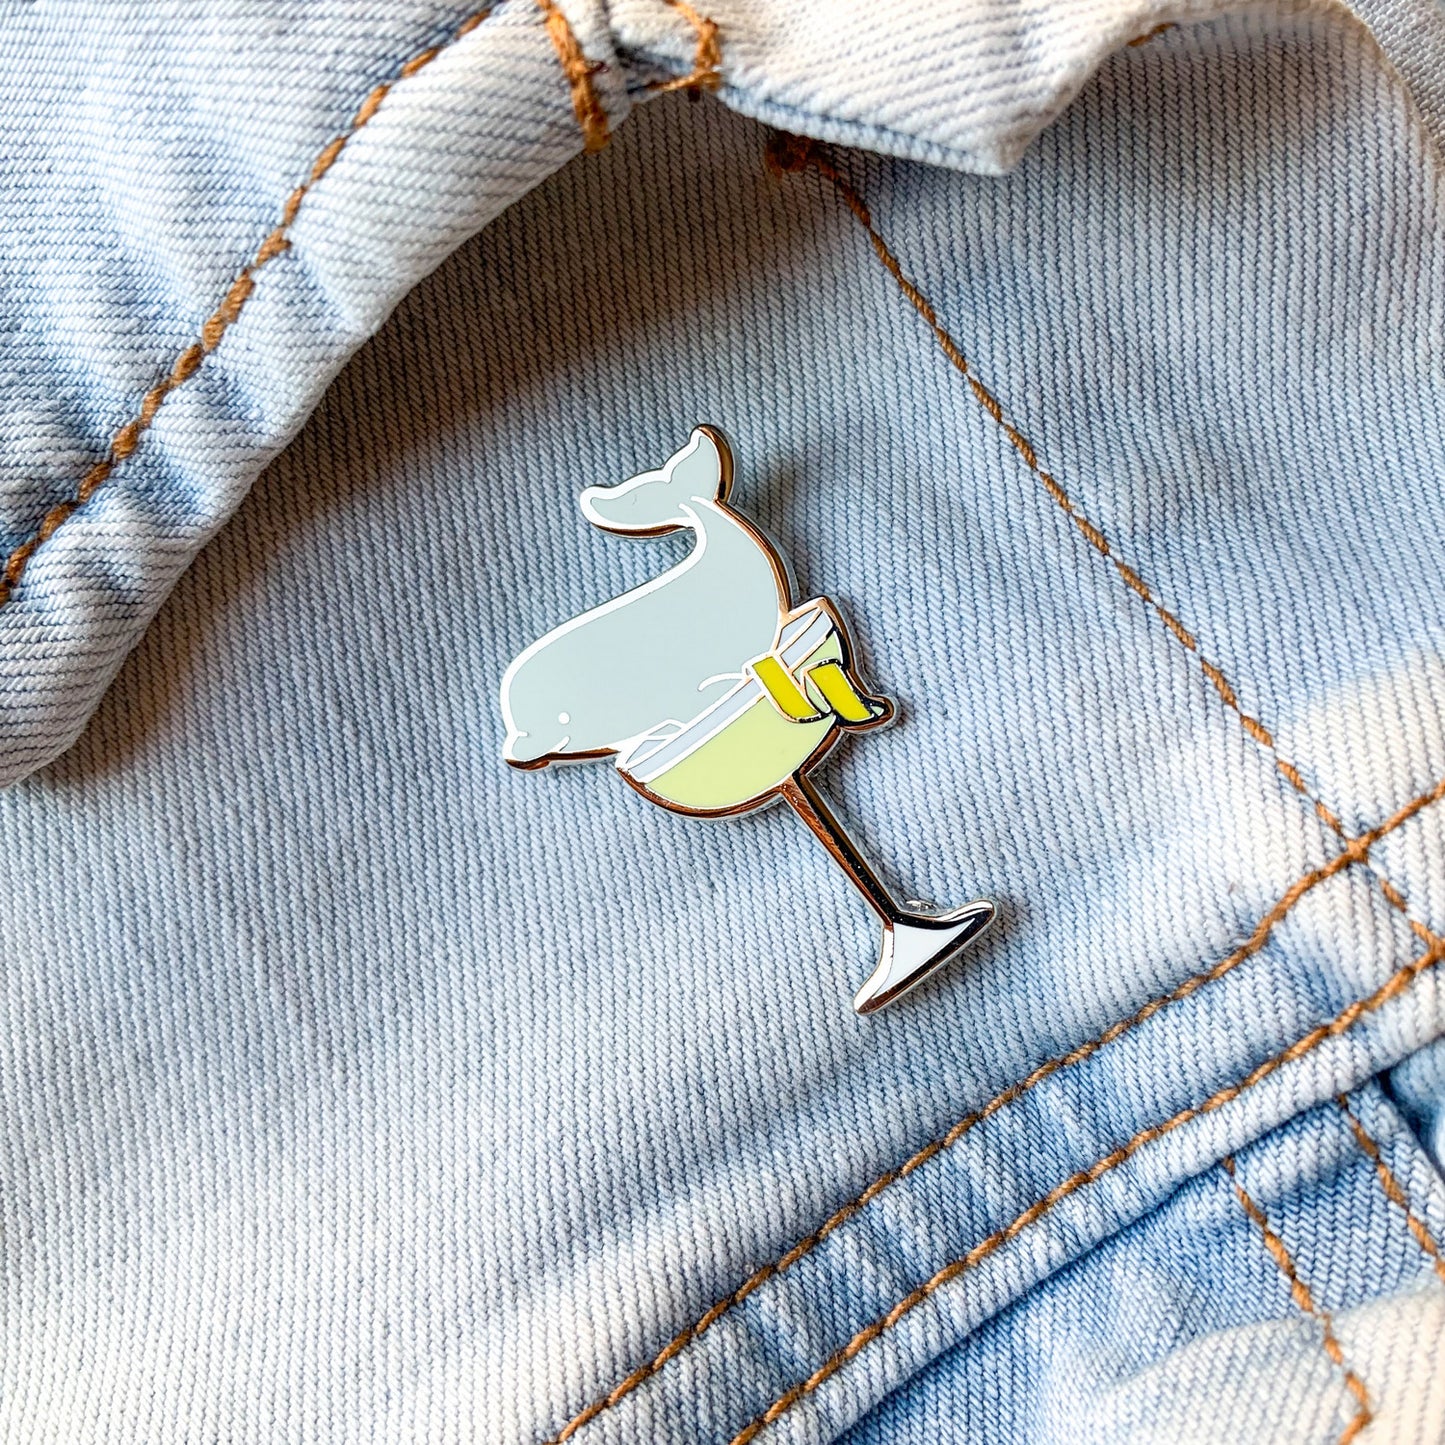 Beluga & White Lady Cocktail Hard Enamel Pin by Cocktail Critters